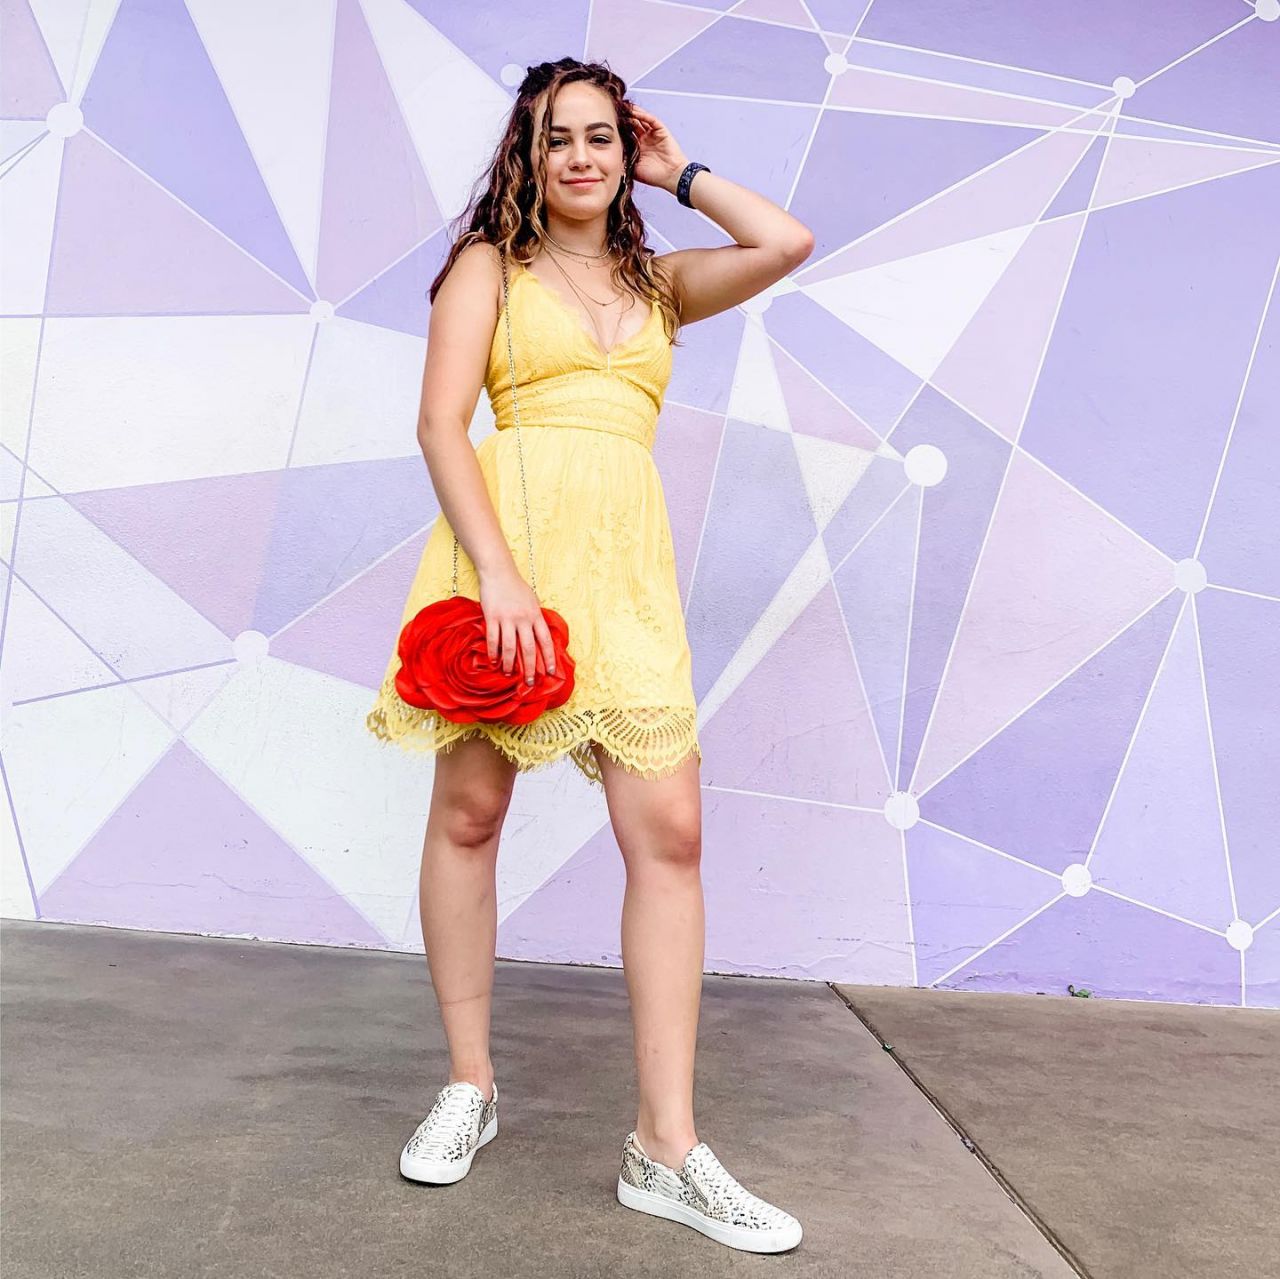 Mary mouser diabetes - 🧡 Who is Mary Mouser dating? 